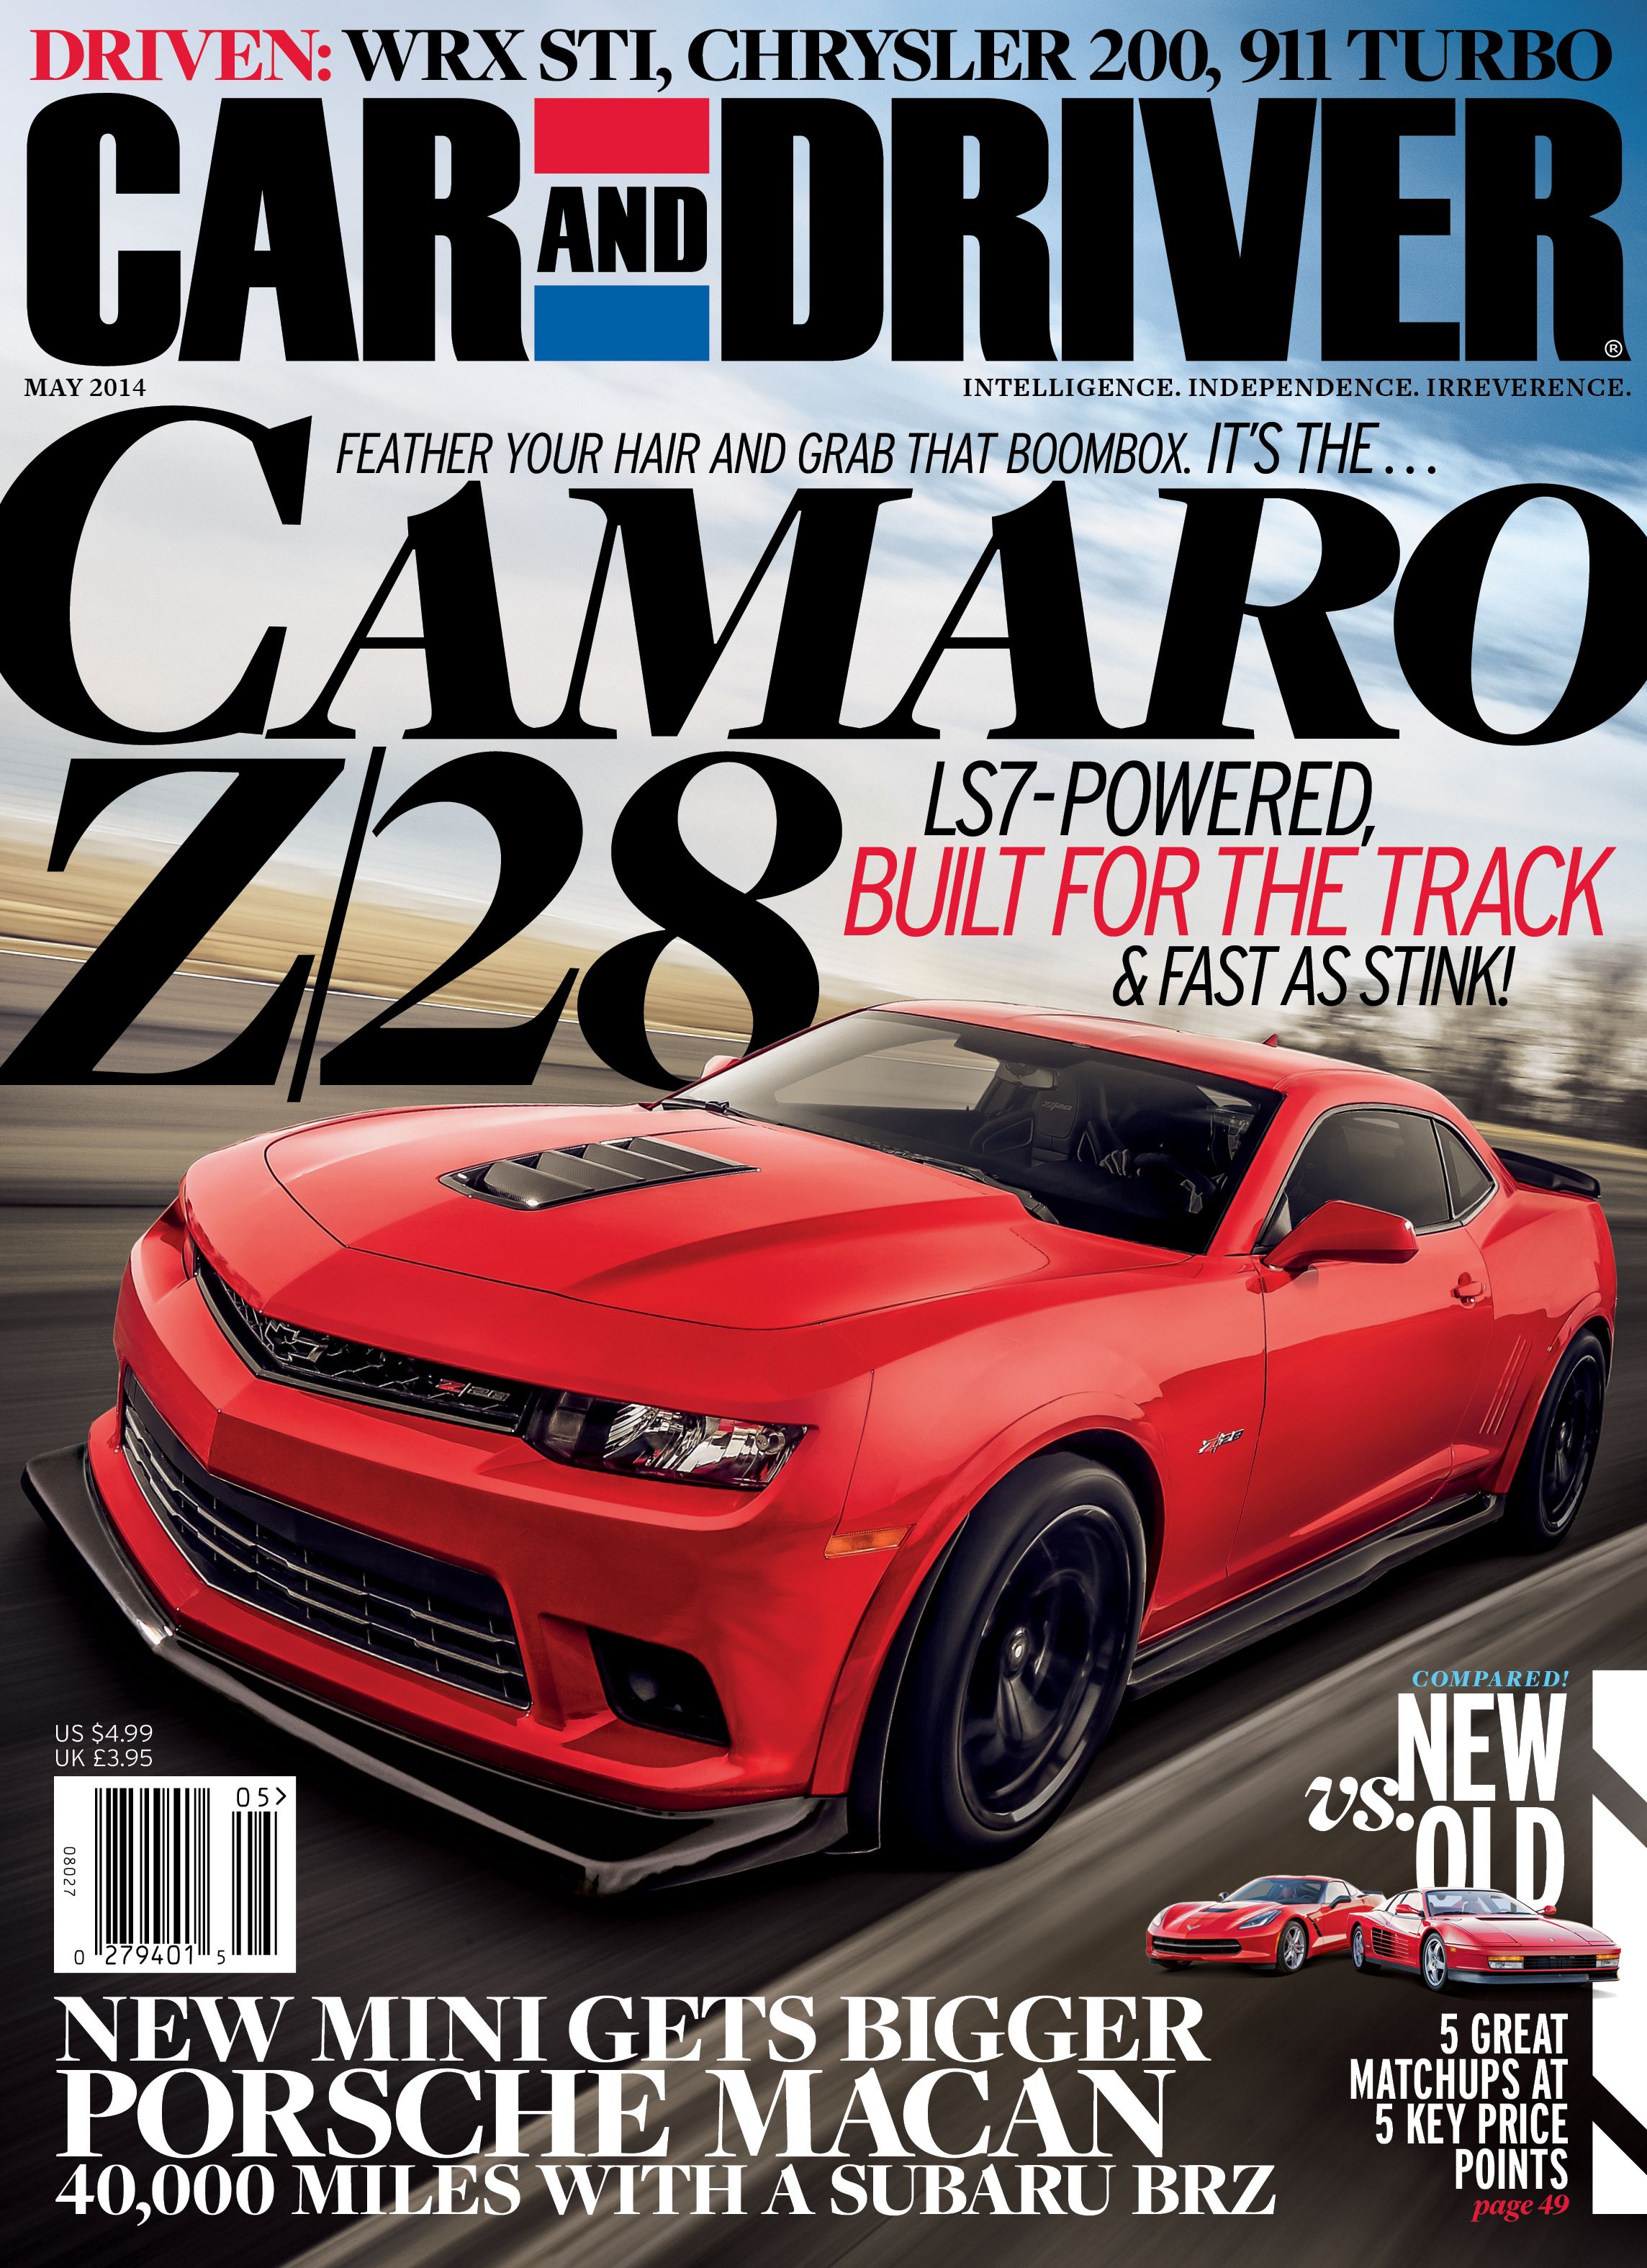 Car and Driver Magazine: May 2014 Issue